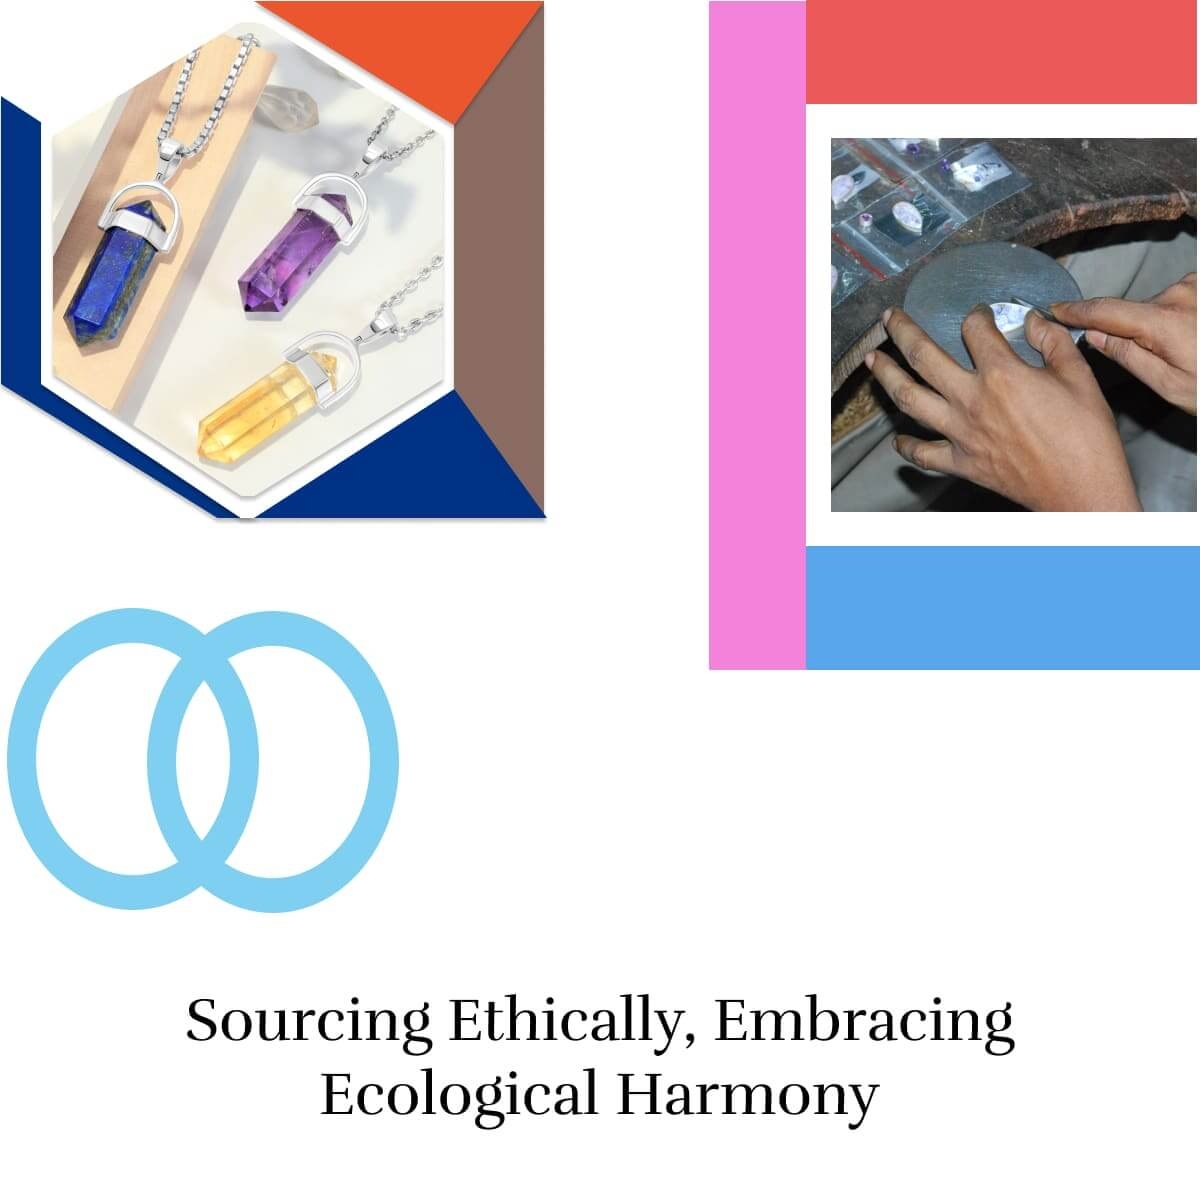 Ethical Sourcing and Ecological Harmony